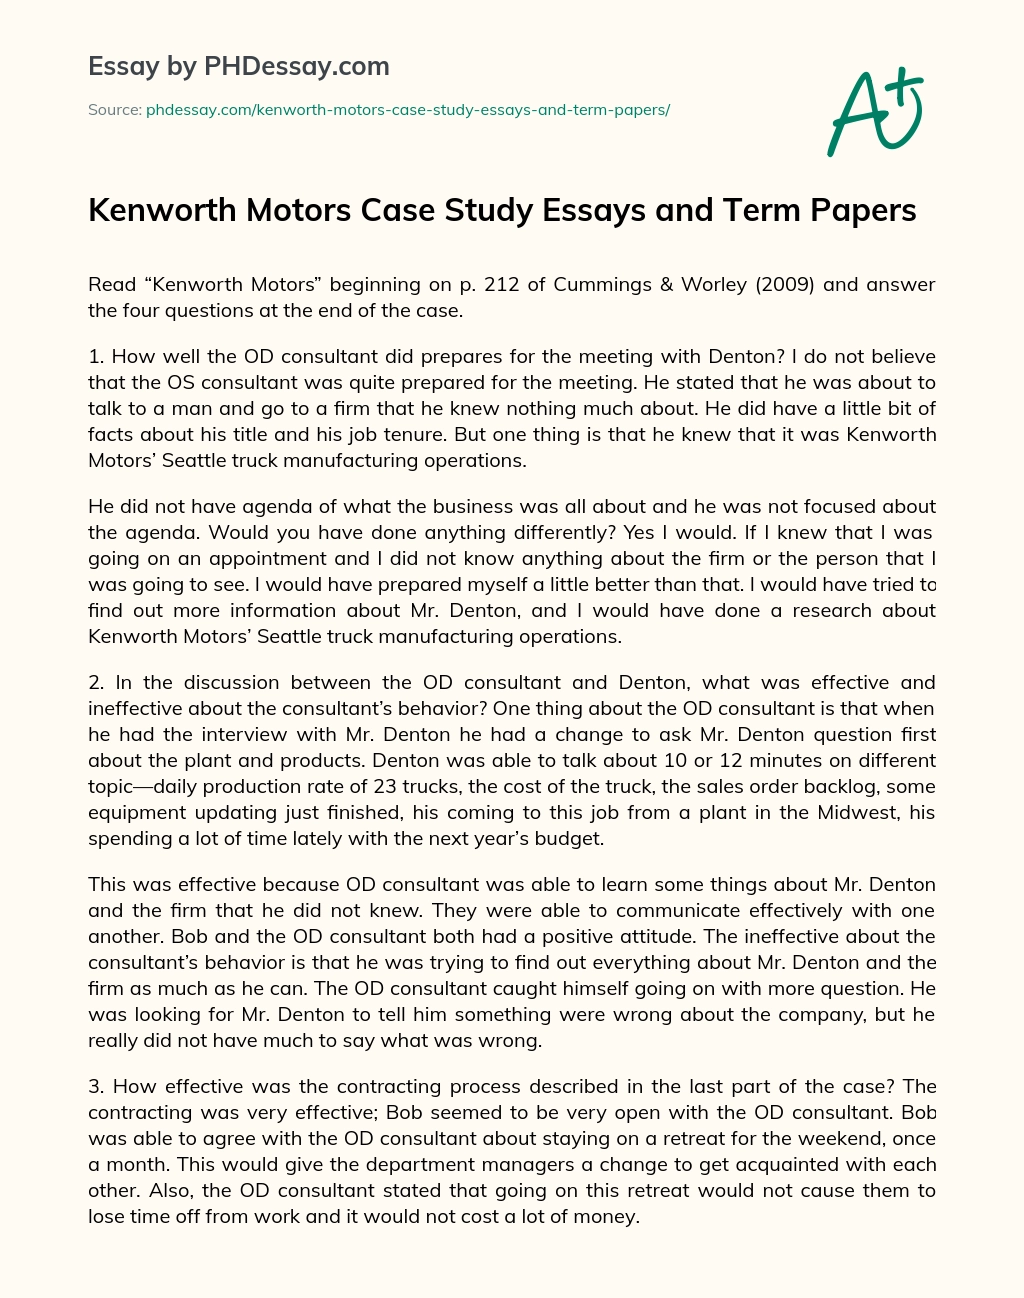 Kenworth Motors Case Study Essays and Term Papers essay